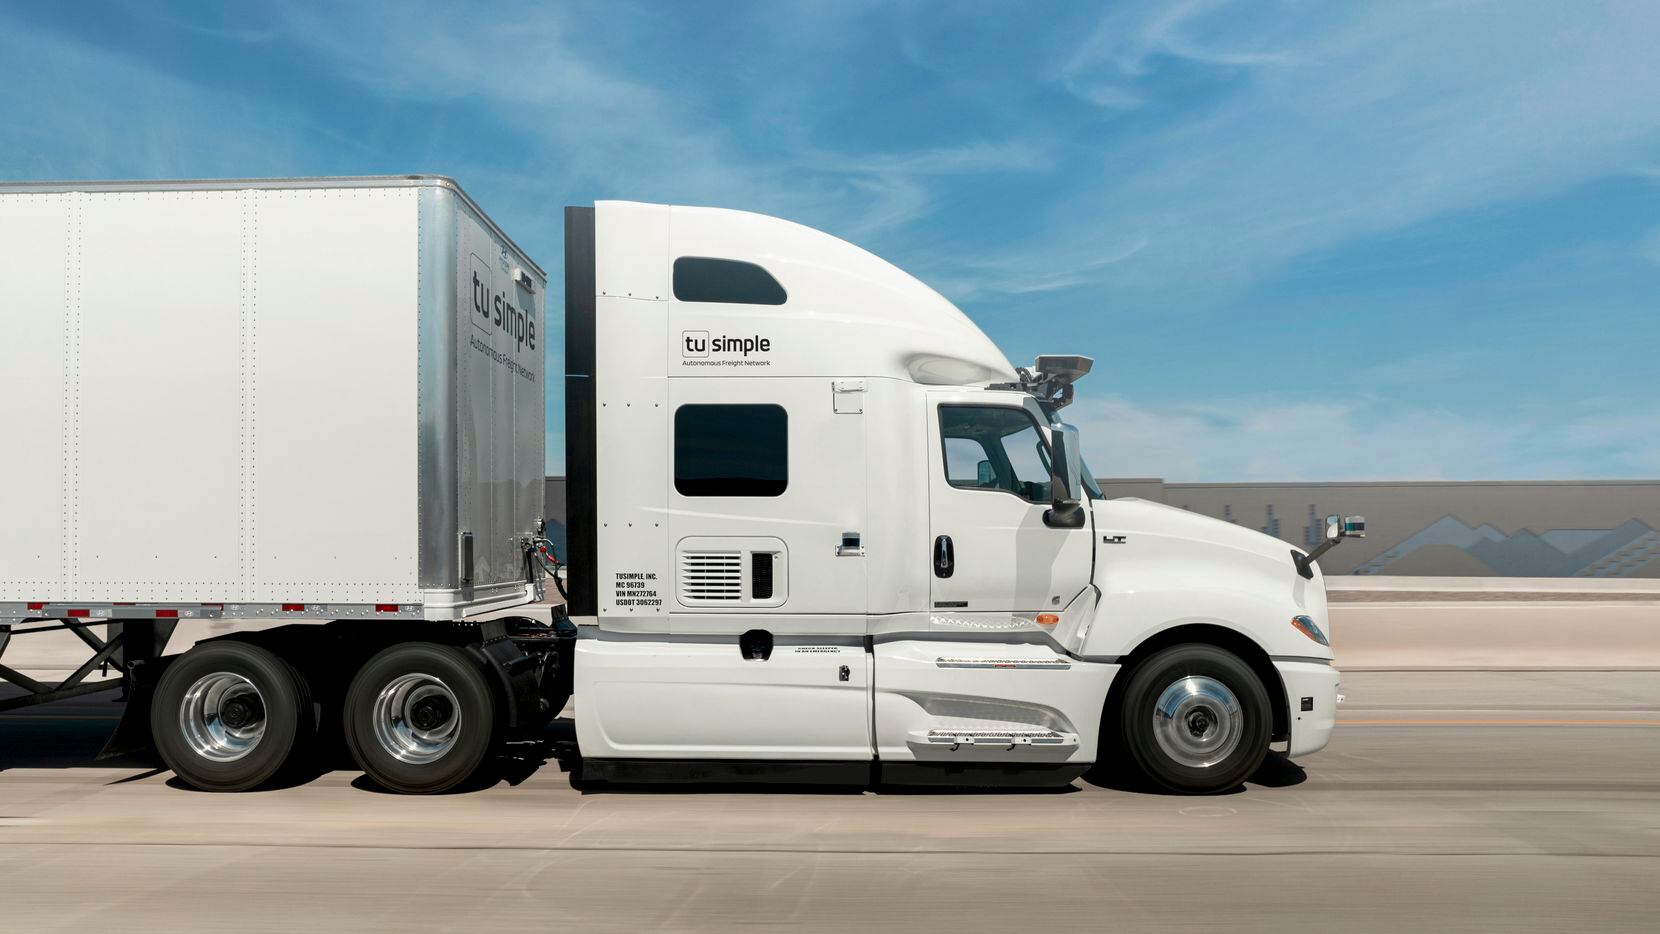 TuSimple is one of the self-driving trucking firms using Texas as a proving ground,